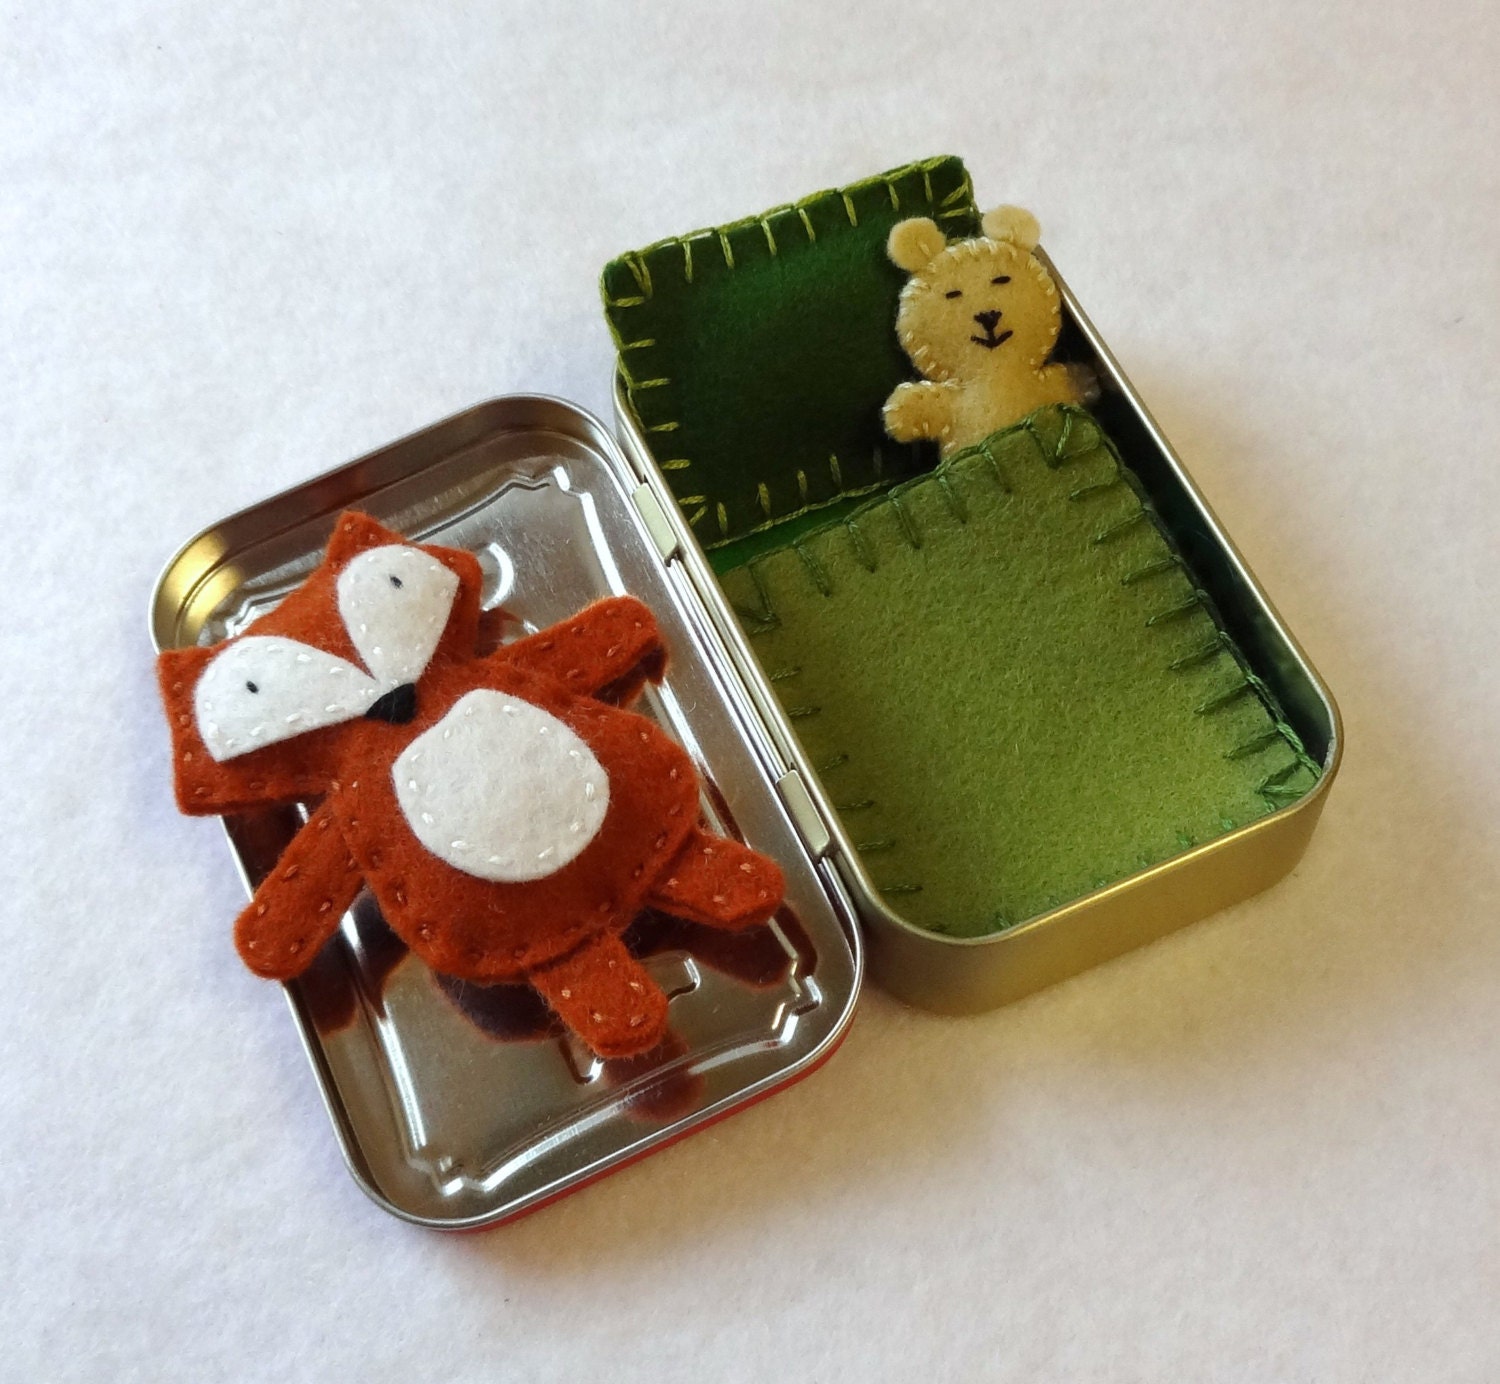 Fox in a Box with green bedding - wool felt fox and teddy bear in Altoids Tin - made to order - EarthyMamaGoods